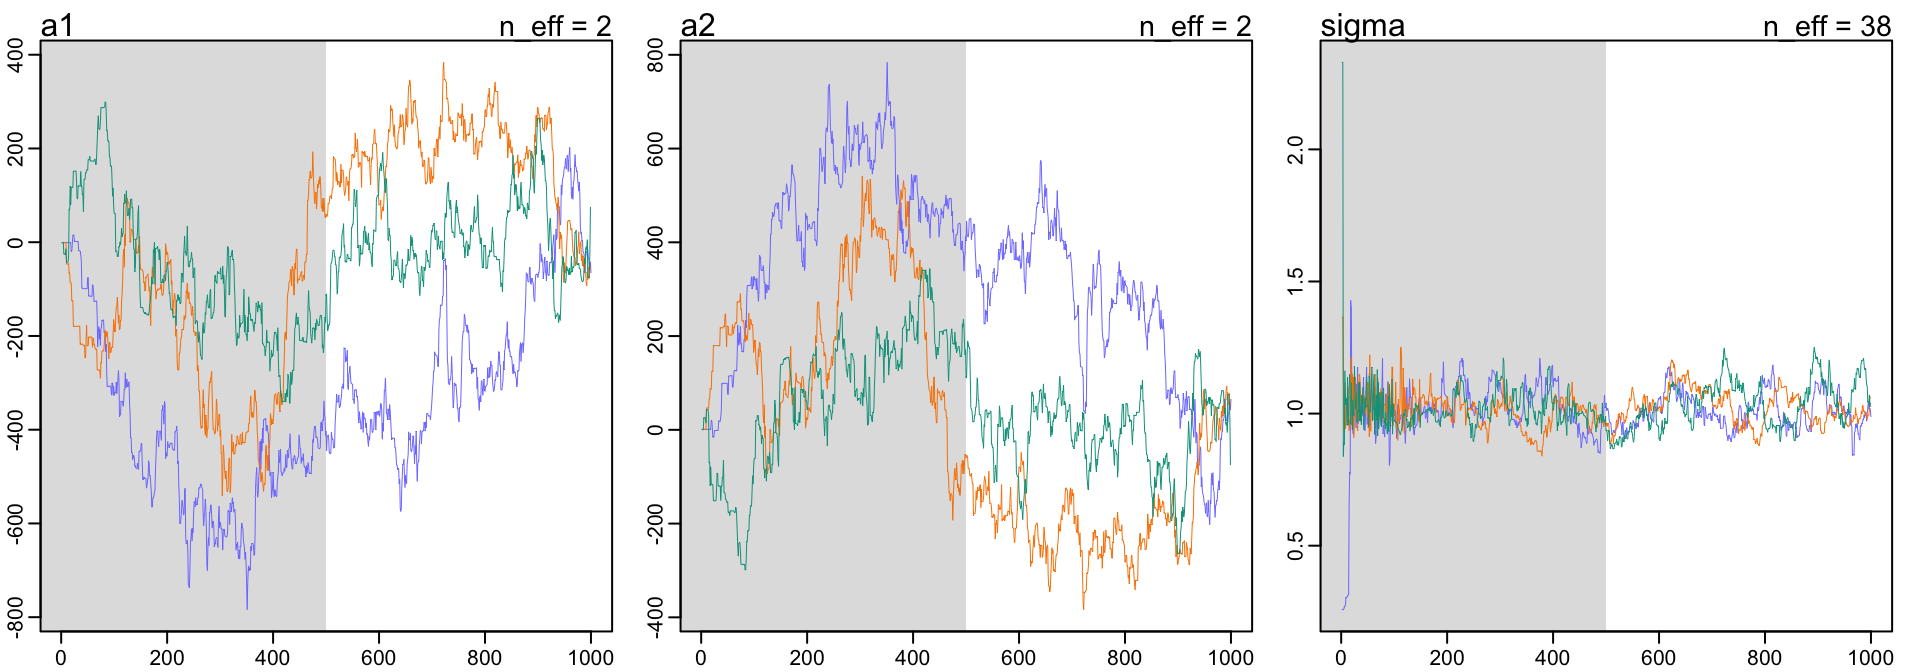 Diagnosing trace plot from three trains by model m9.4. These chains are unhealthy, and wandering between different values and unstable. You cannot use these samples.